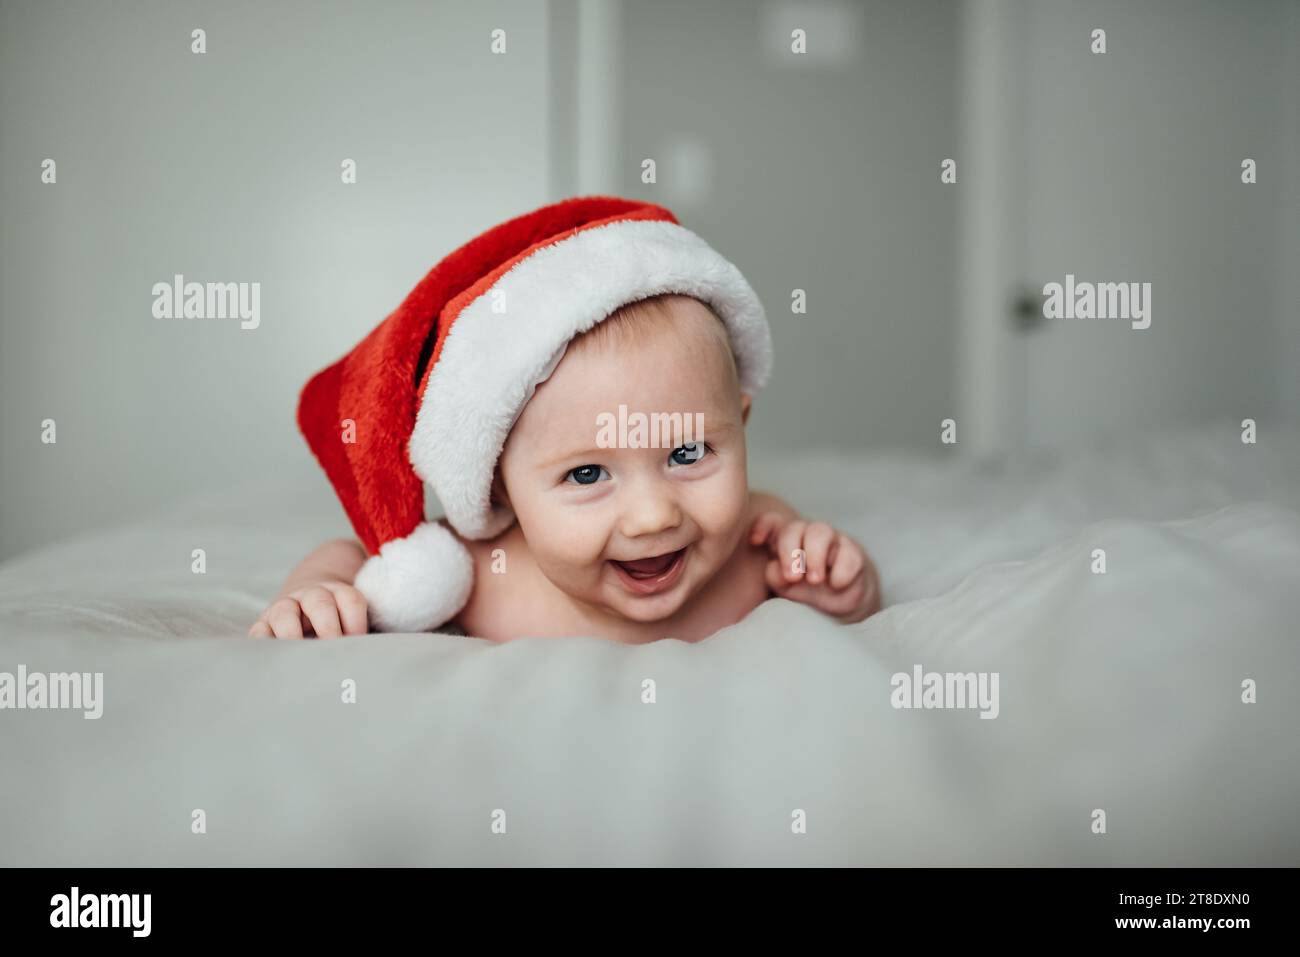 Close up of baby boy wearing christmas Santa hat while smiling a Stock Photo